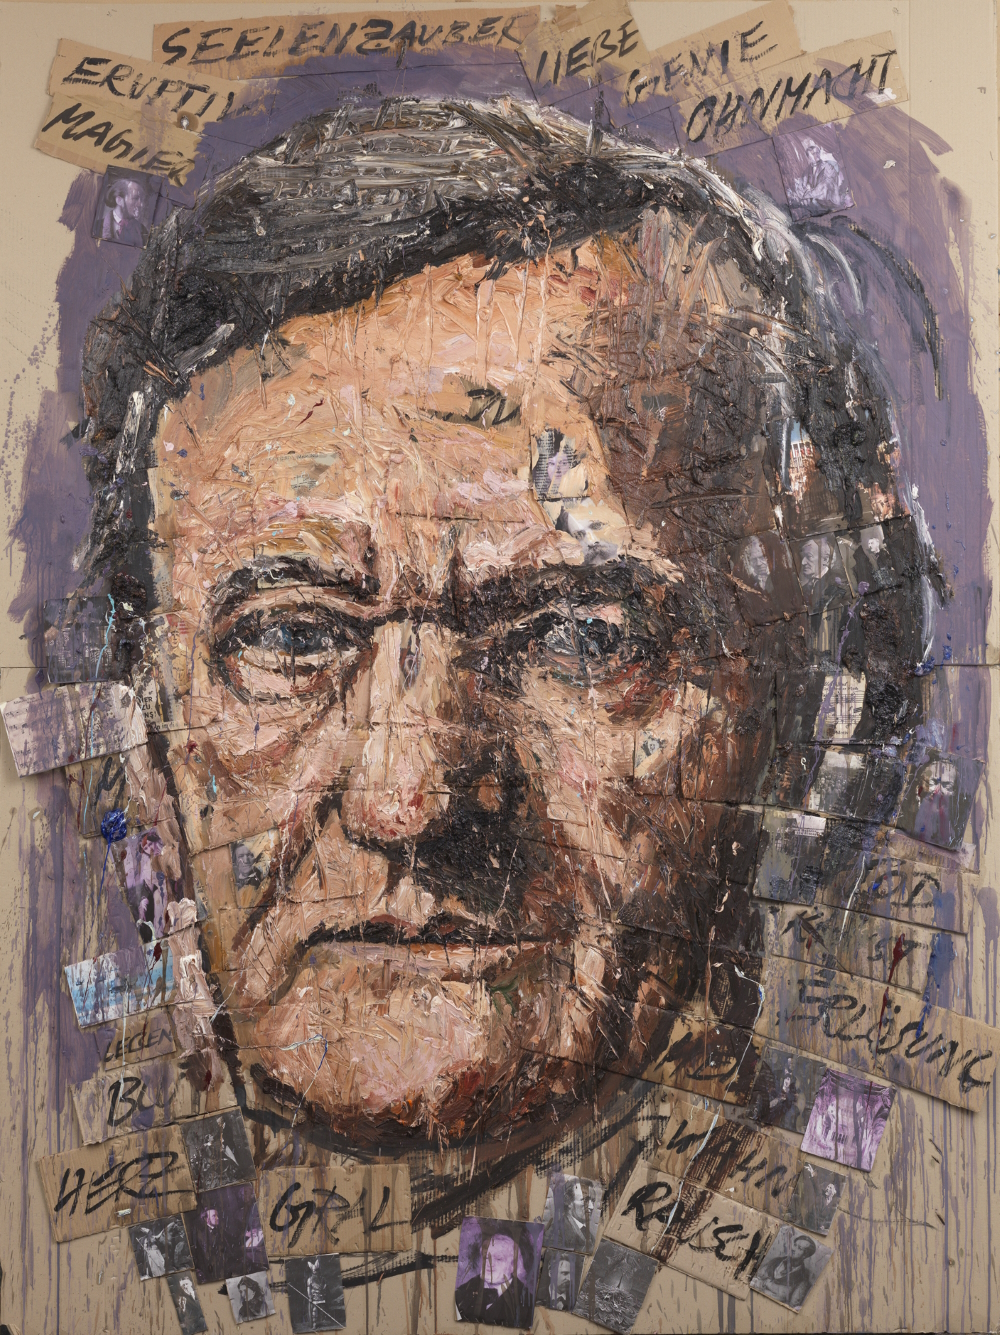 Richard Wagner, the German composer (known for his operas/music dramas), theatre director and conductor. 280 x 210 cm, oil on cardboard, 2013.